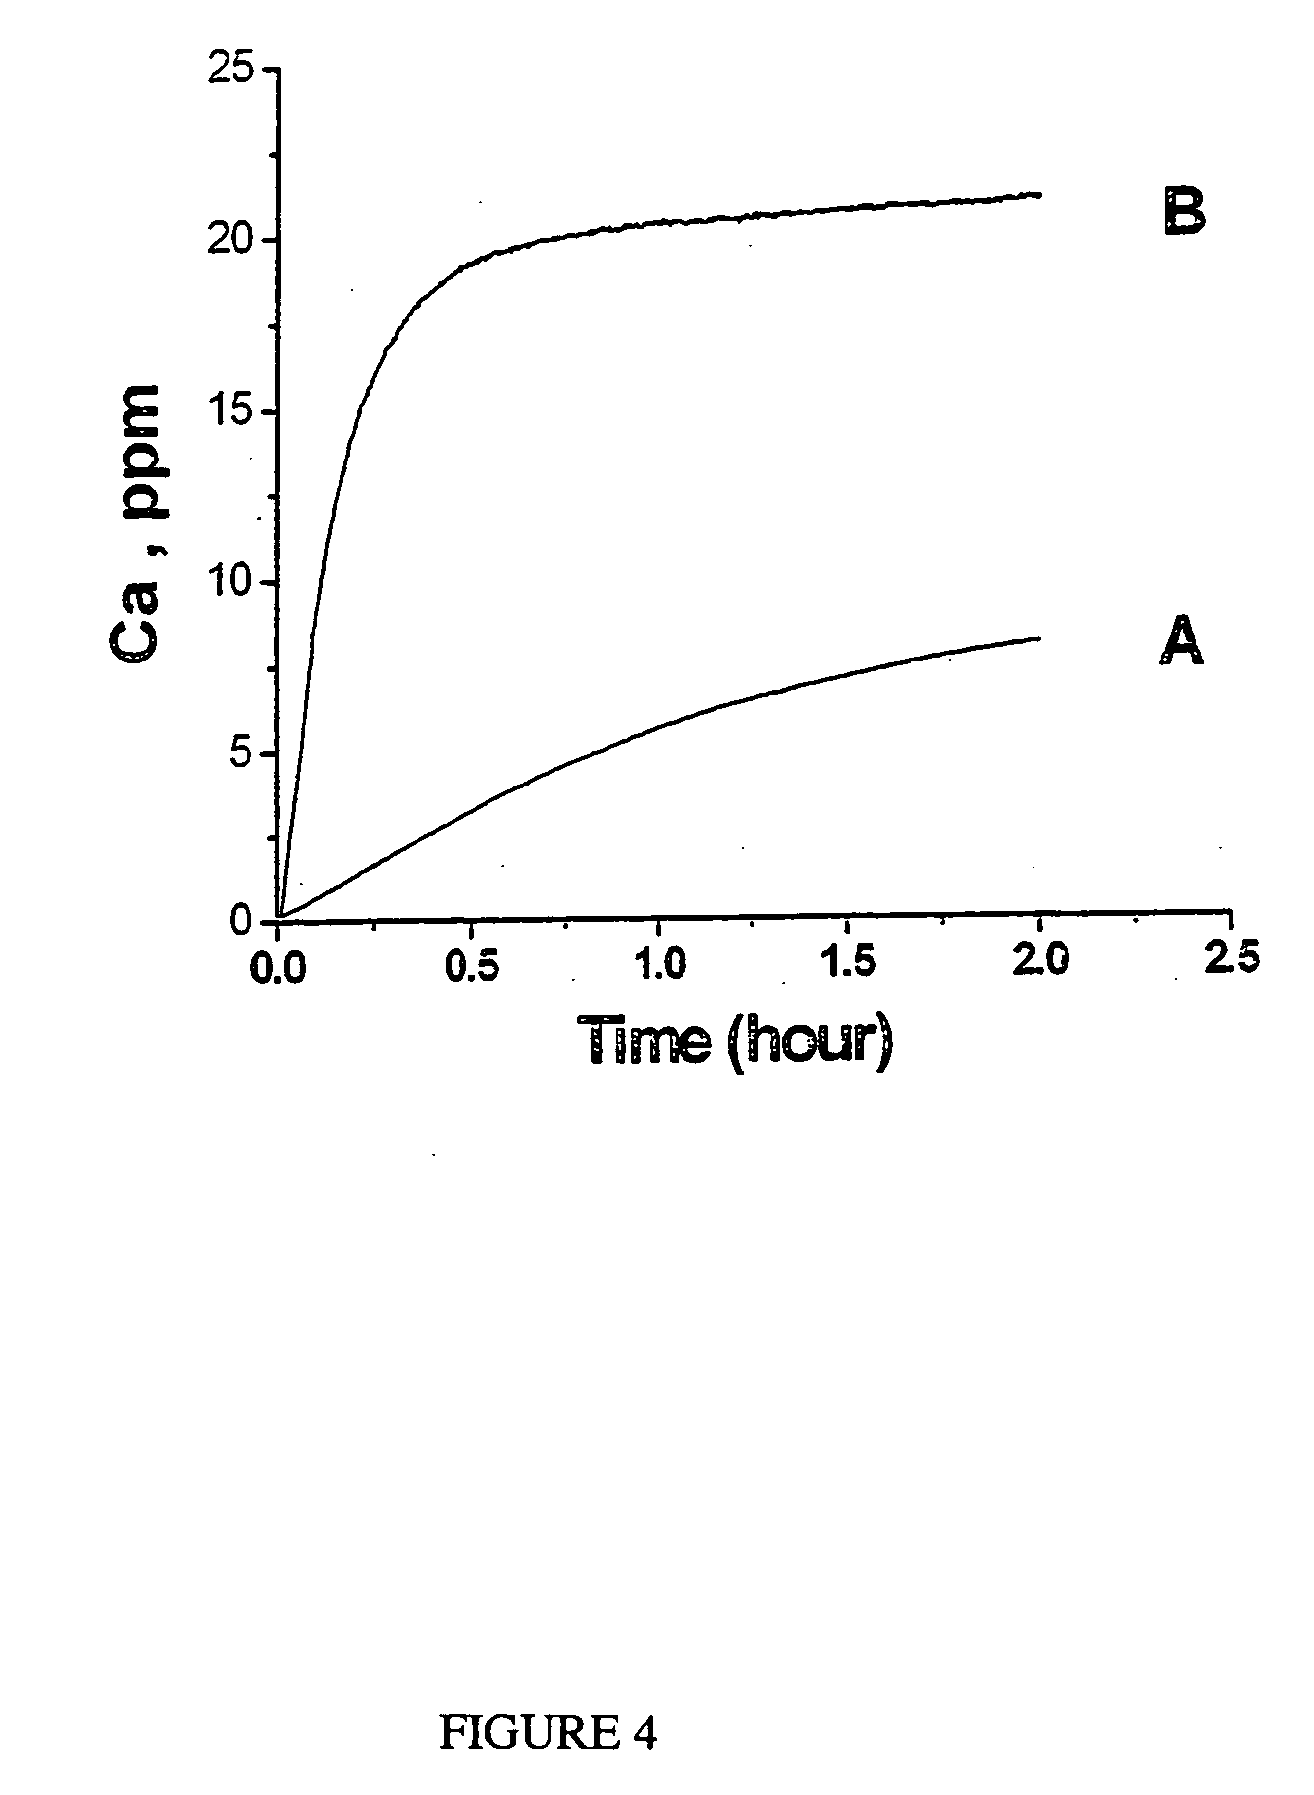 Method for producing adherent coatings of calcium phosphate phases on titanium and titanium alloy substrates by electrochemical deposition